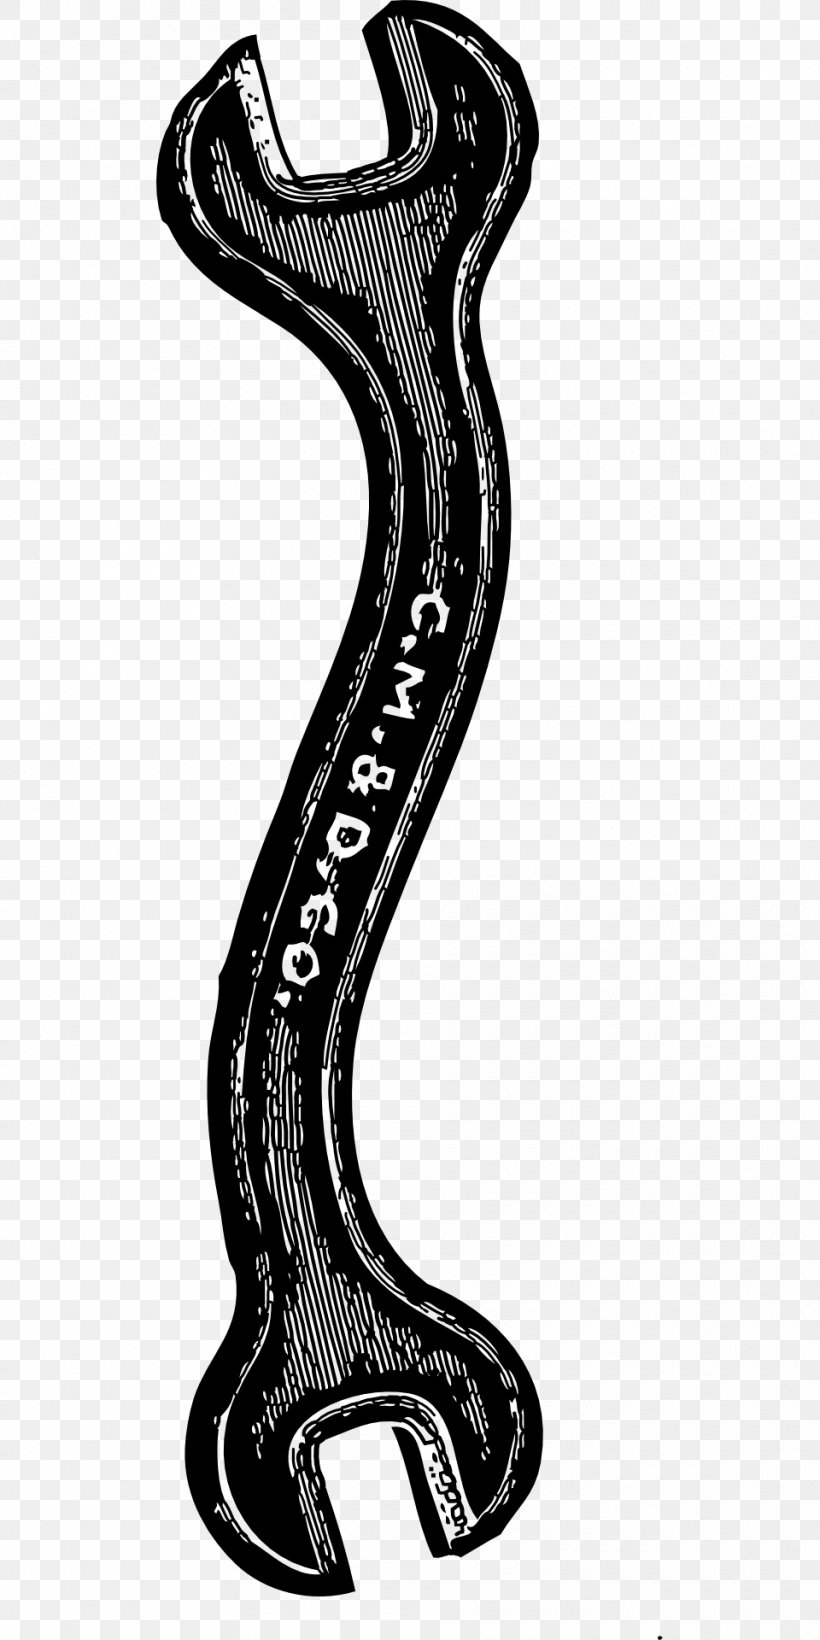 Spanners Adjustable Spanner Tool Clip Art, PNG, 960x1920px, Spanners, Adjustable Spanner, Black, Black And White, Hand Tool Download Free